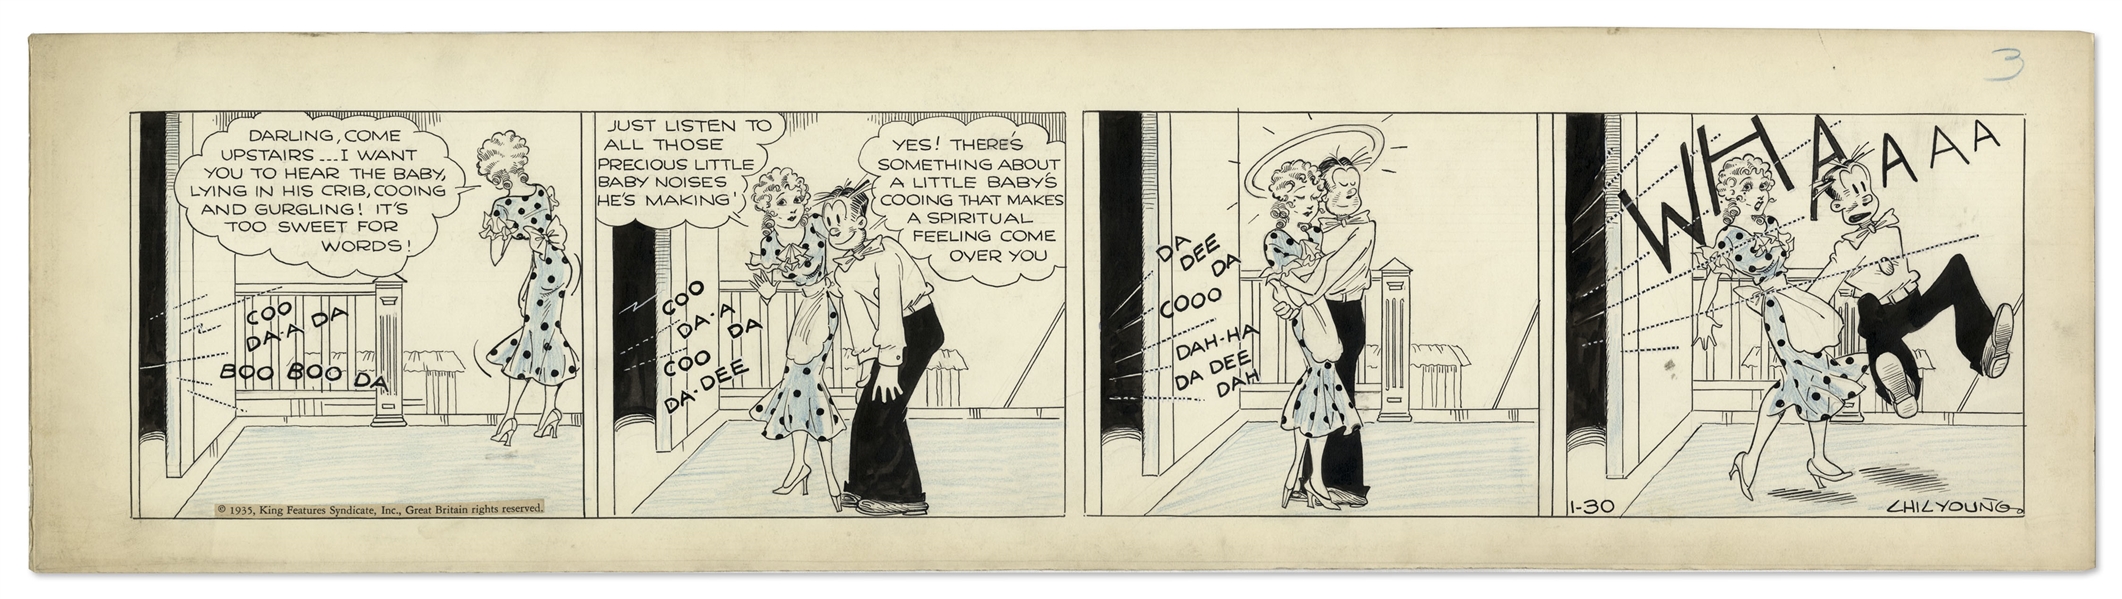 Chic Young Hand-Drawn ''Blondie'' Comic Strip From 1935 Titled ''A Minor Key'' -- Dagwood & Blondie Experience the Ups & Downs of Parenthood